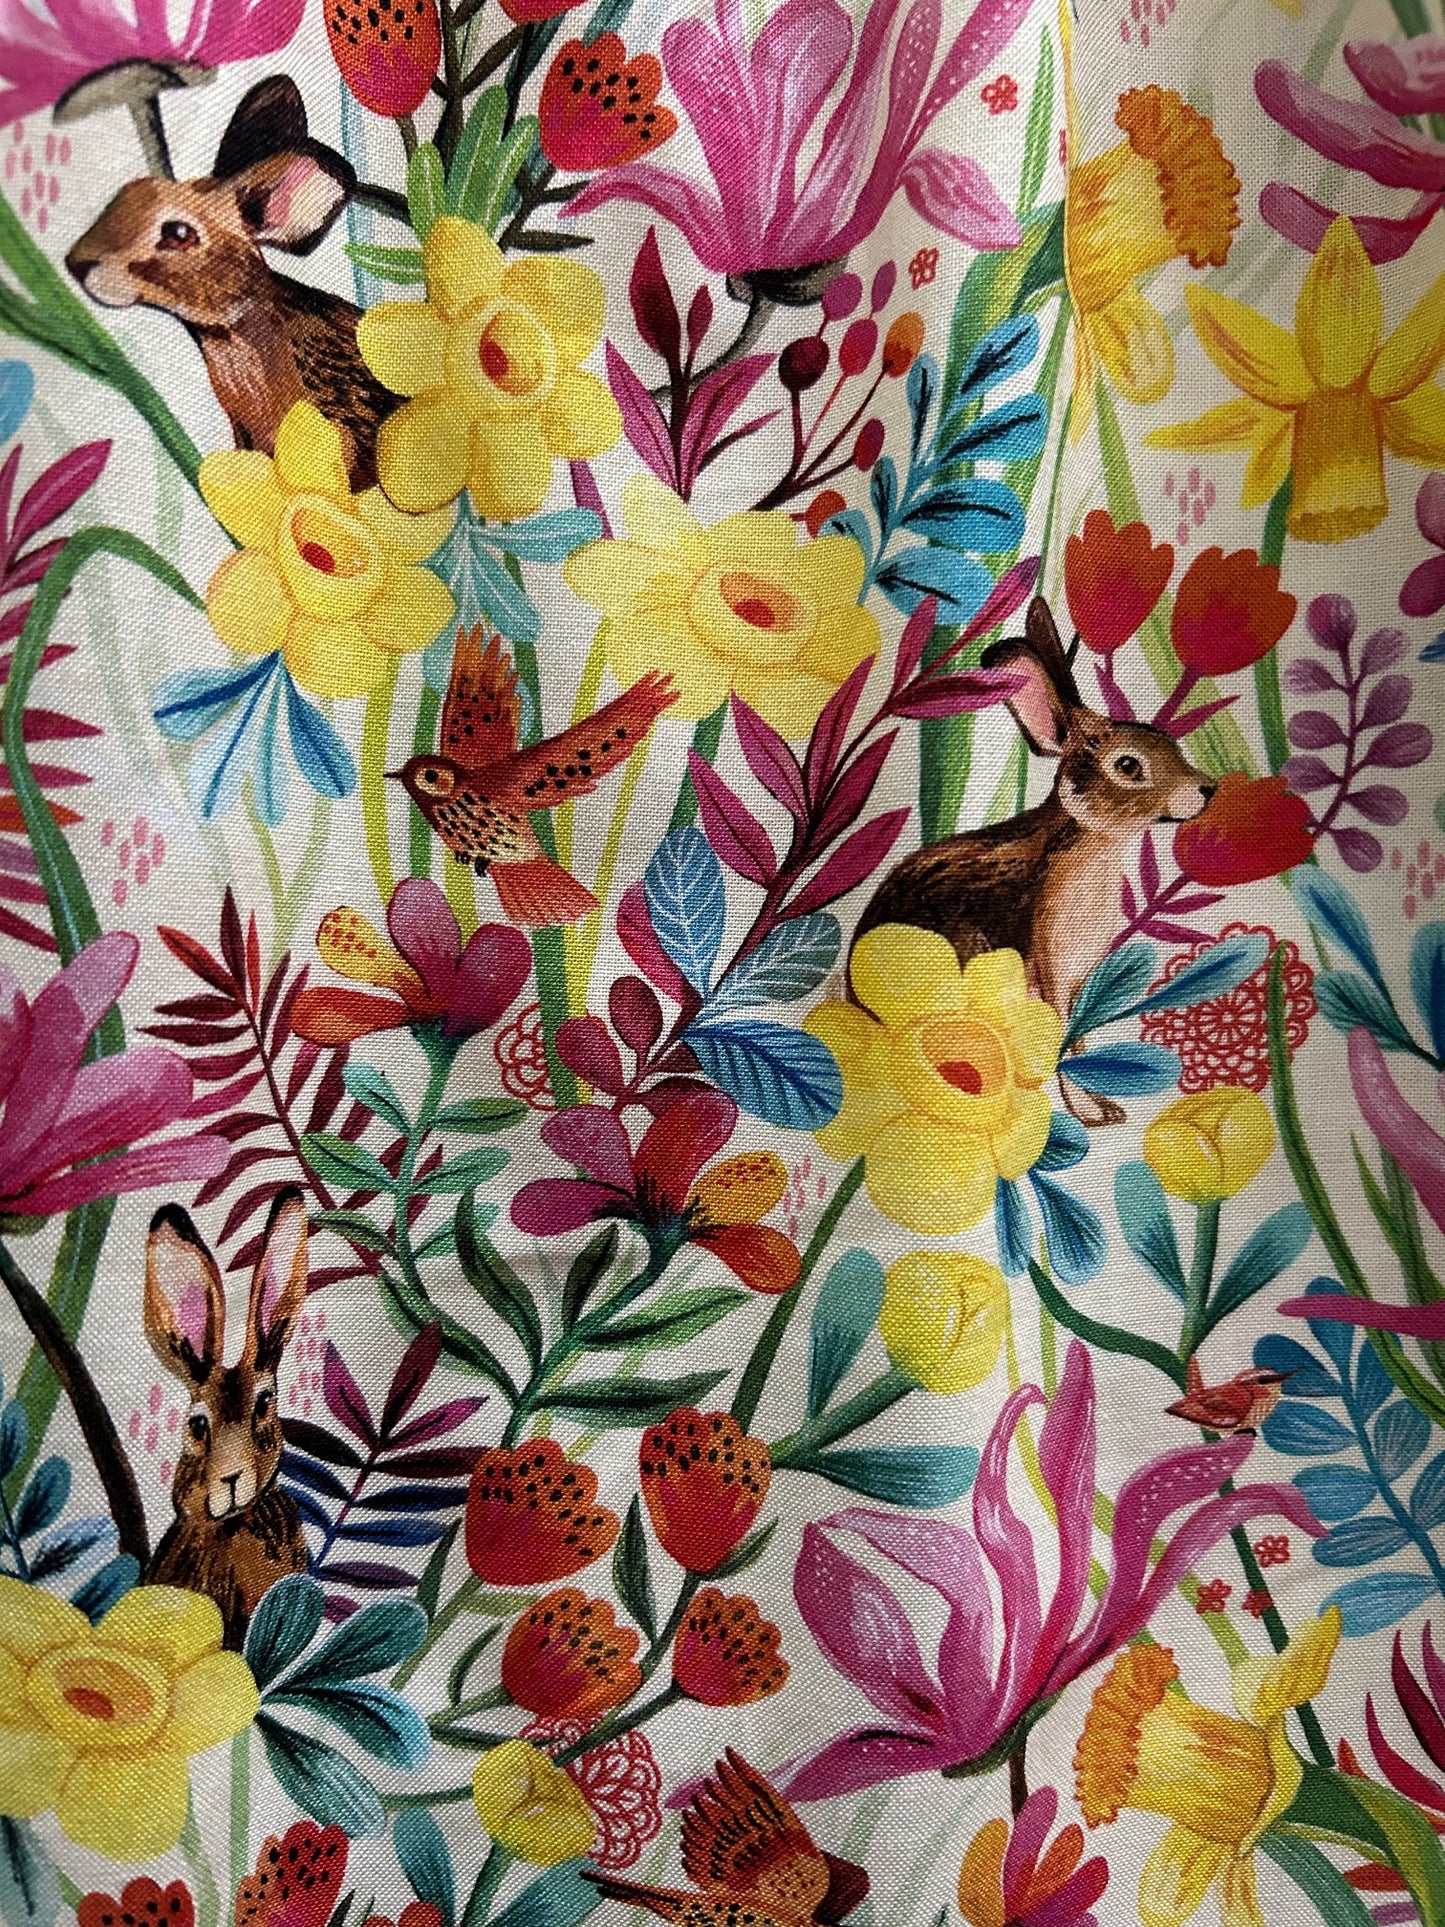 close up showing the fabric print with bunnies, birds and flowers